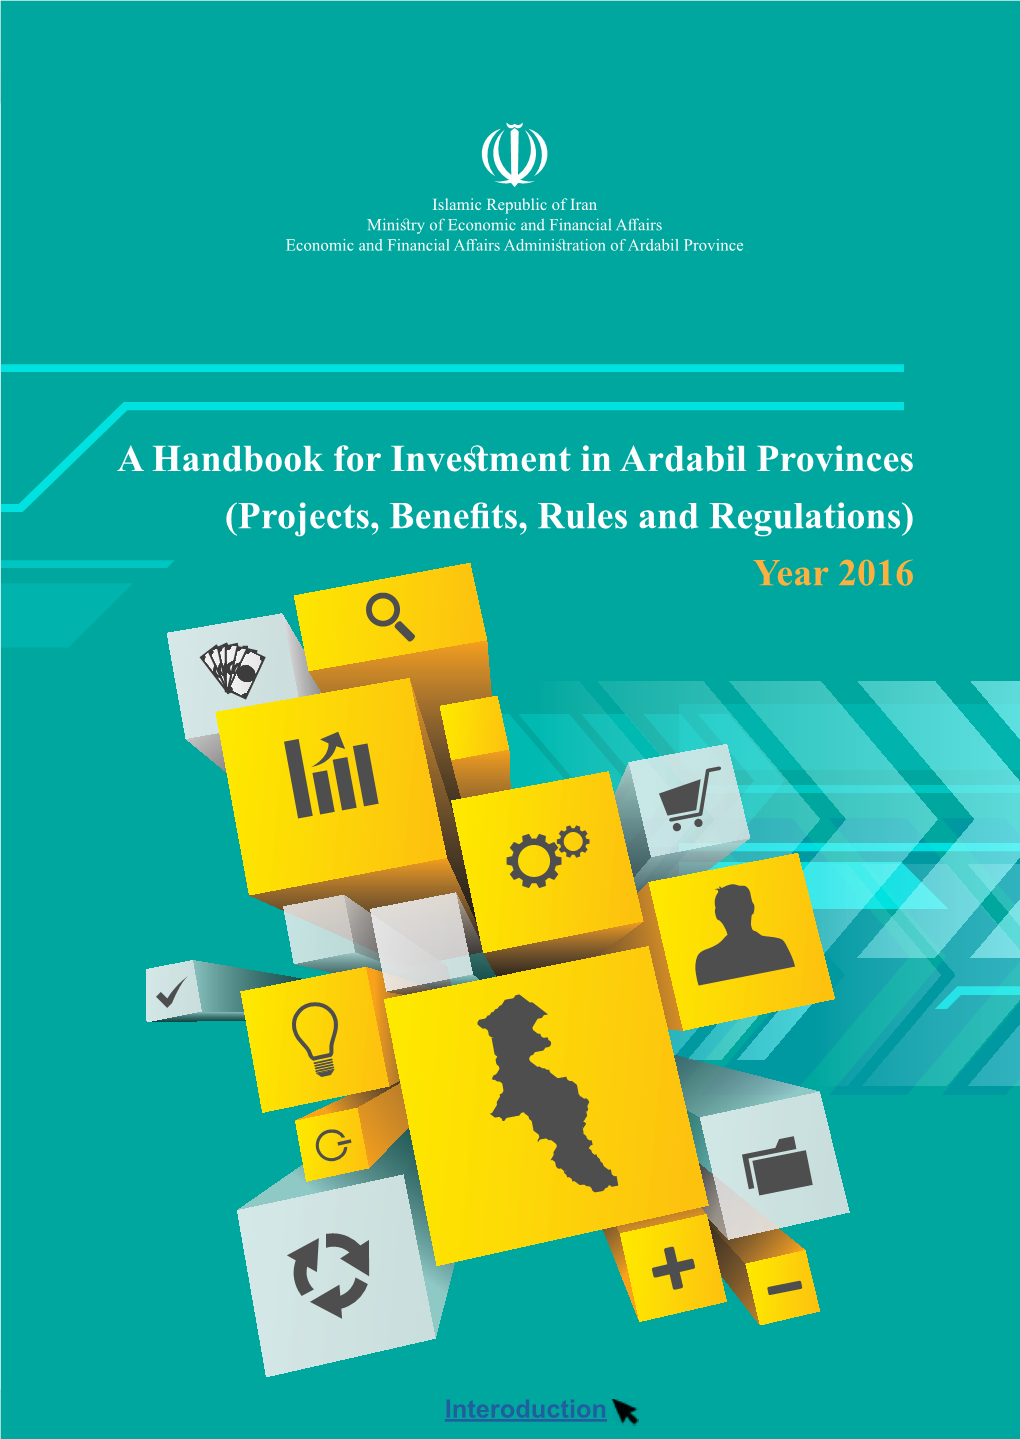 A Handbook for Inveﬆment in Ardabil Provinces (Projects, Benefits